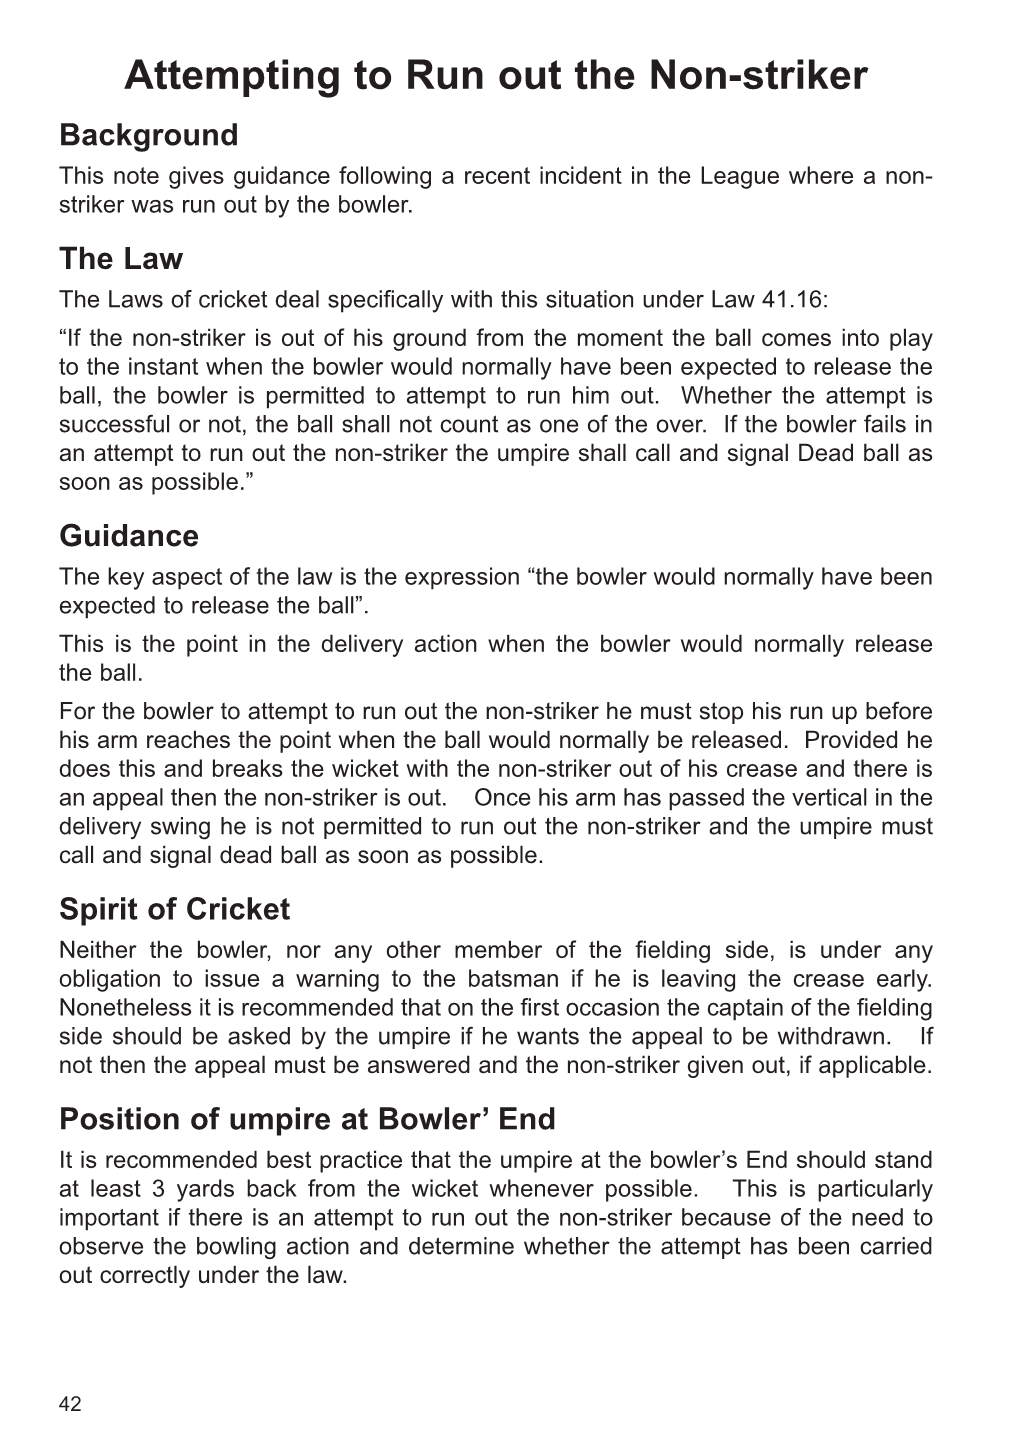 Attempting to Run out the Non-Striker Background This Note Gives Guidance Following a Recent Incident in the League Where a Non- Striker Was Run out by the Bowler